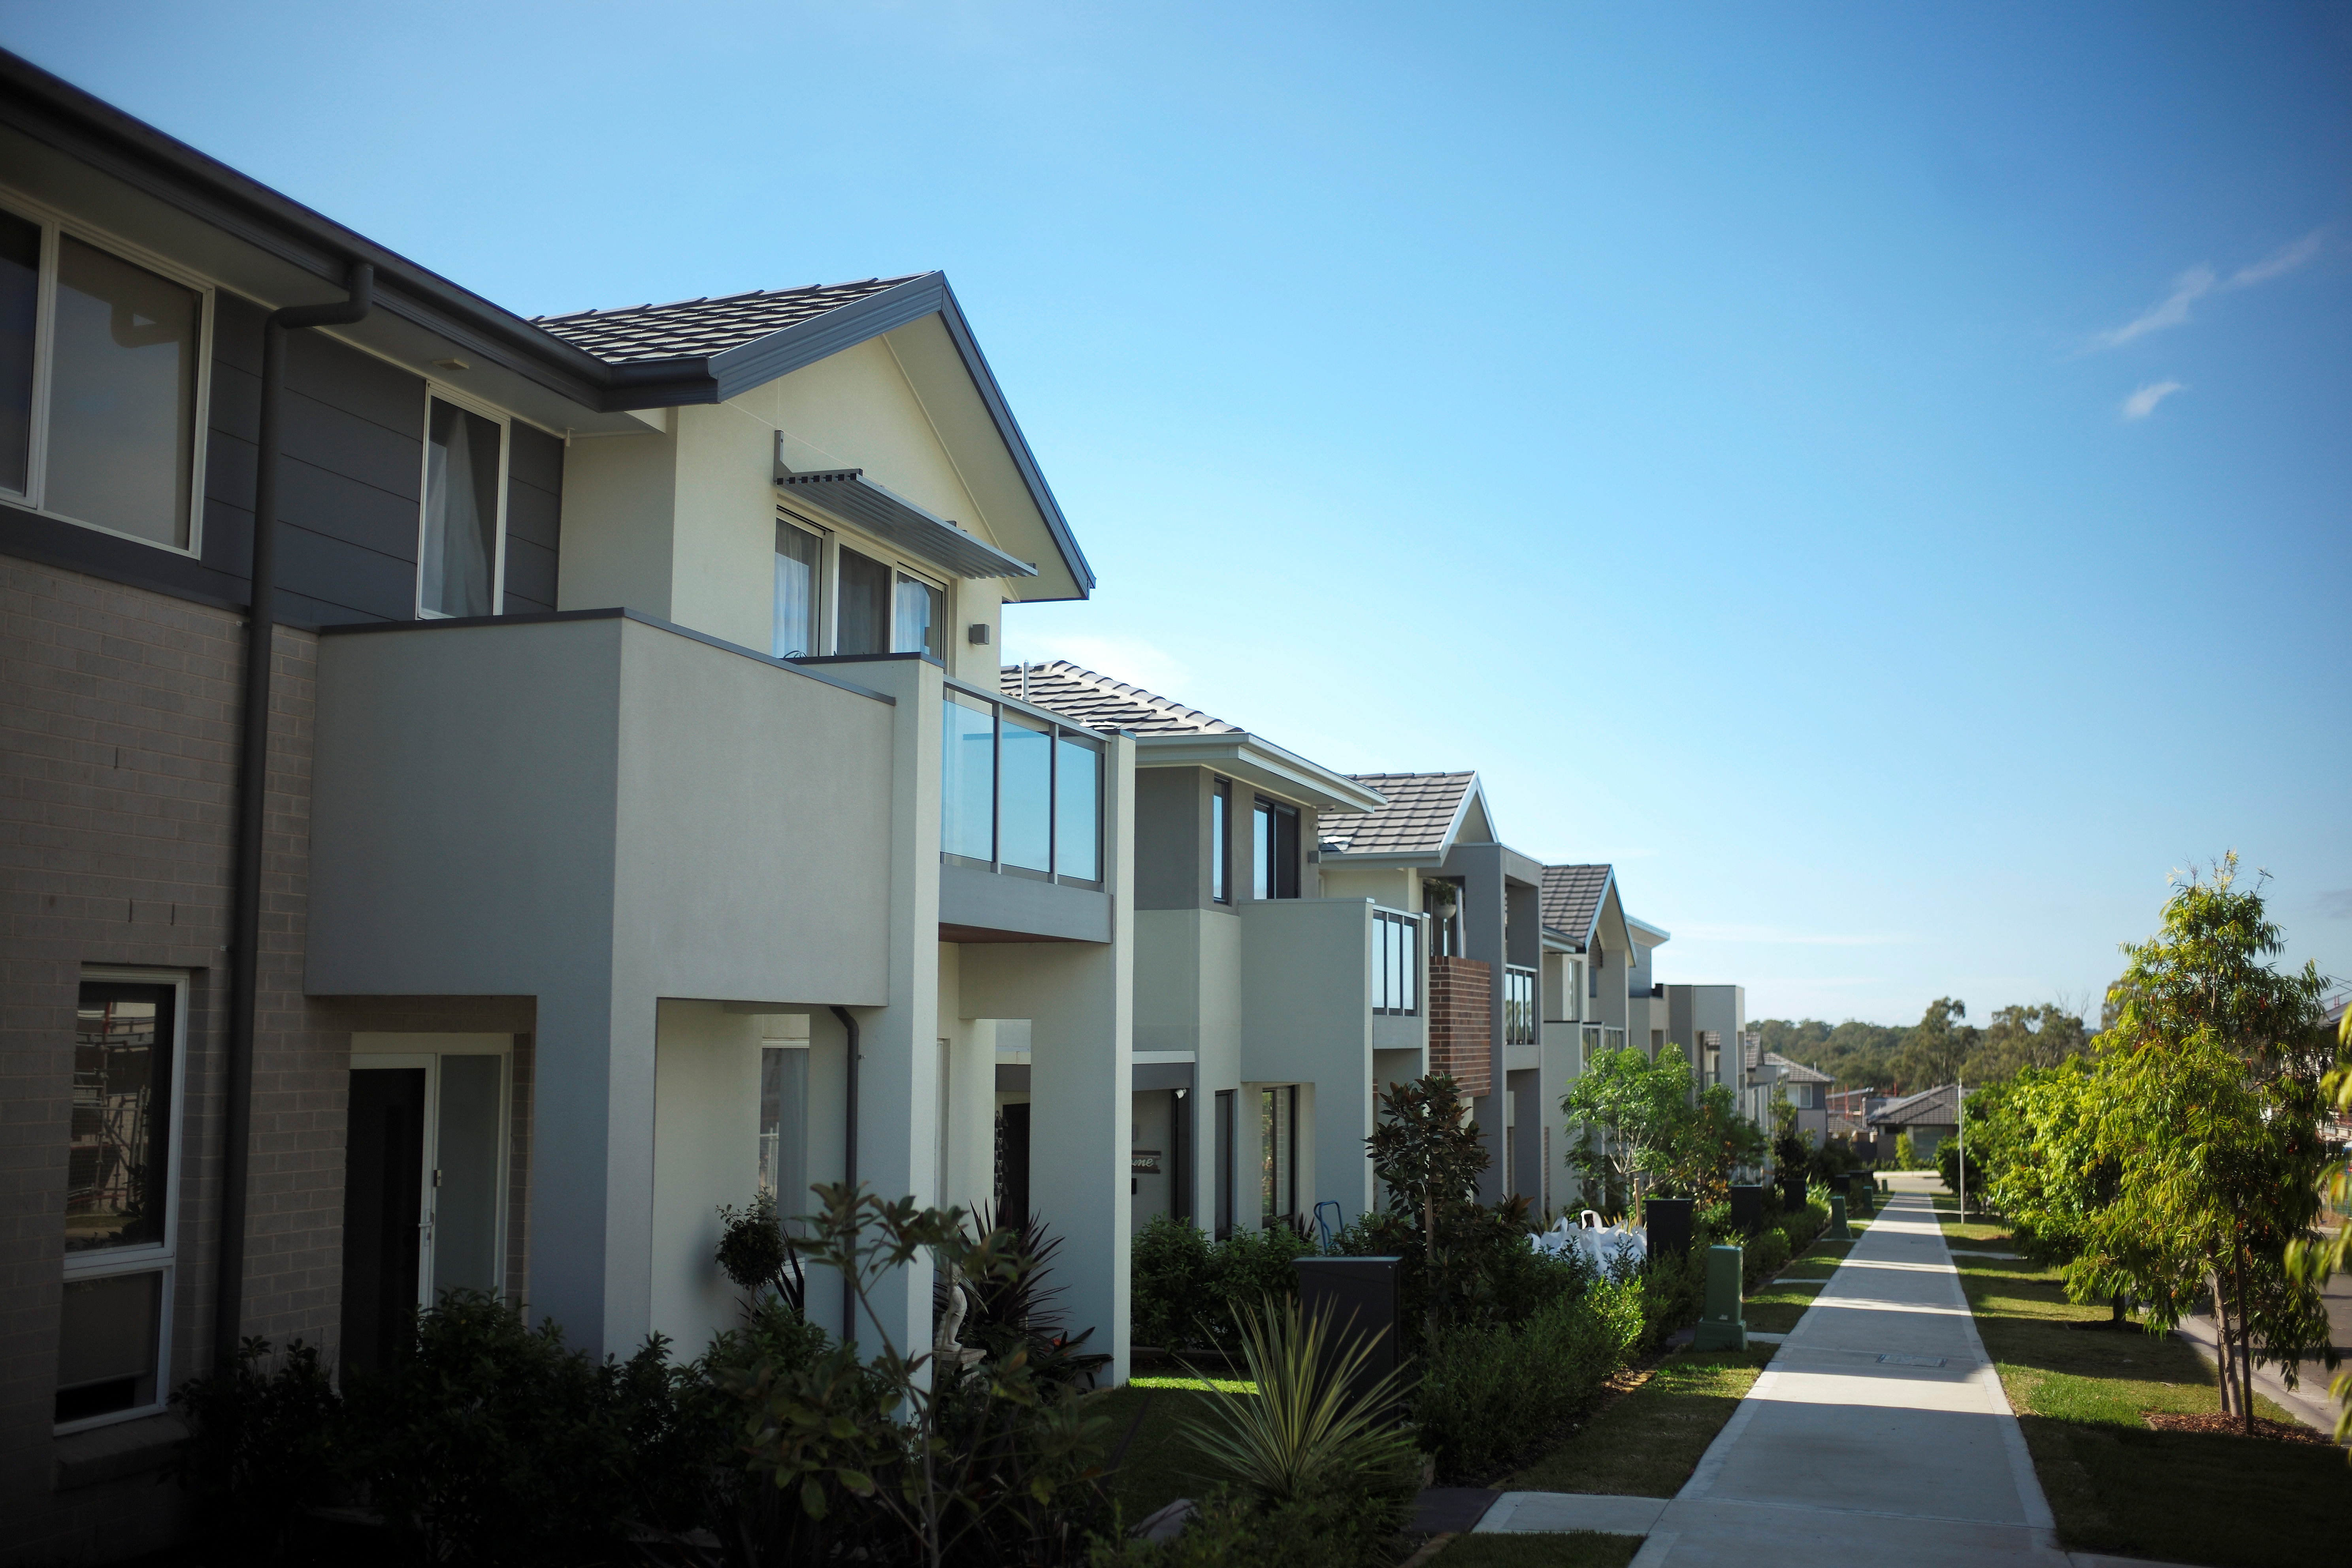 New homes line a street in the Sydney suburb of Moorebank in Australia